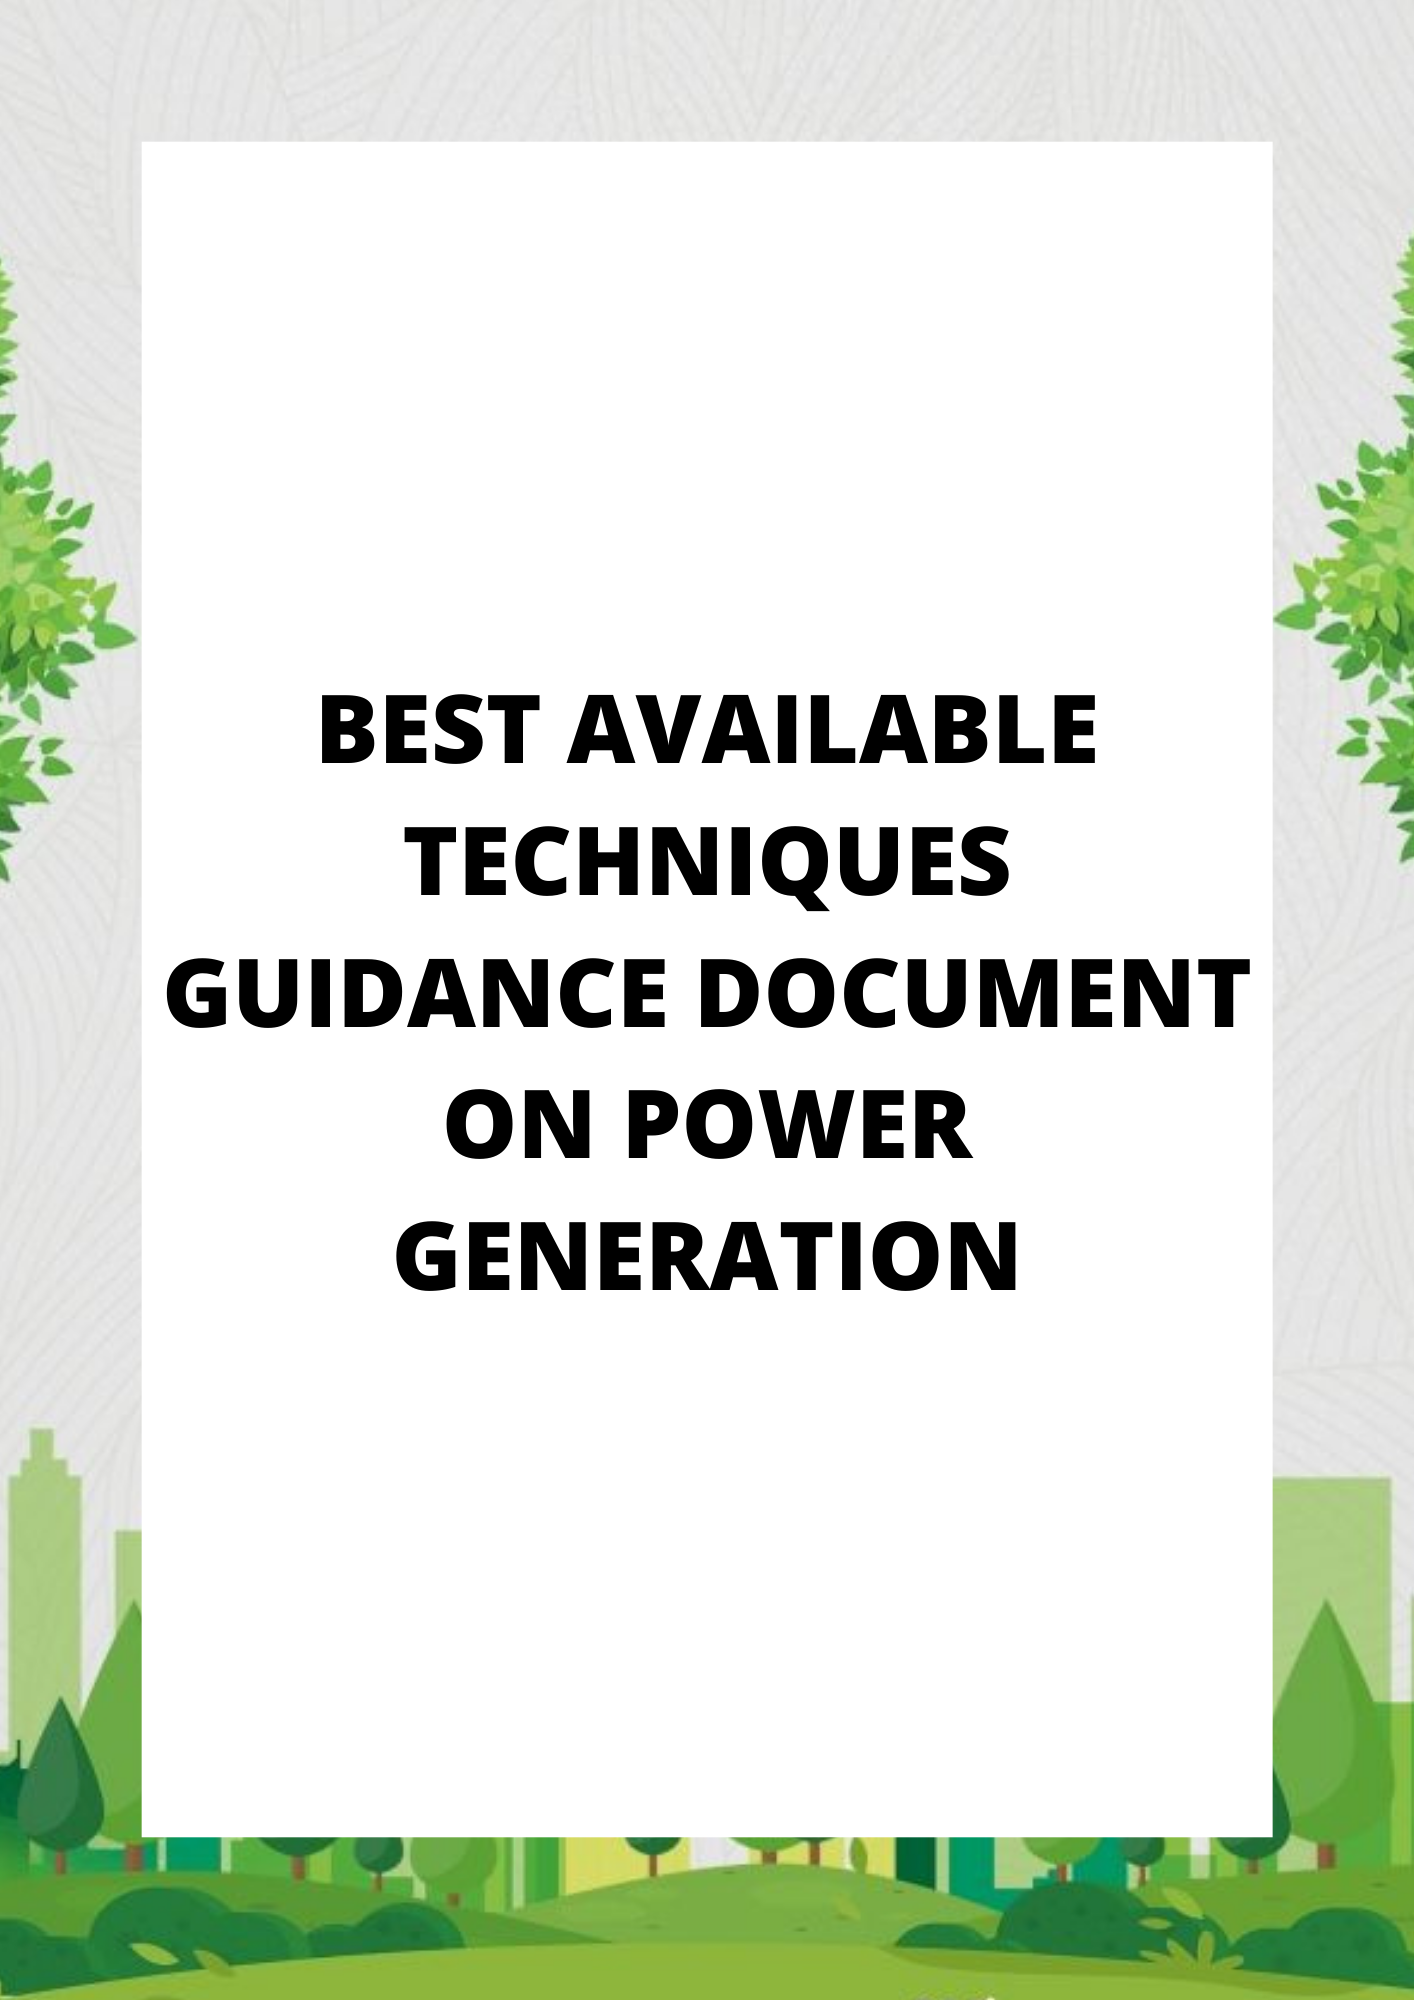 BEST AVAILABLE TECHNIQUES GUIDANCE DOCUMENT ON POWER GENERATION